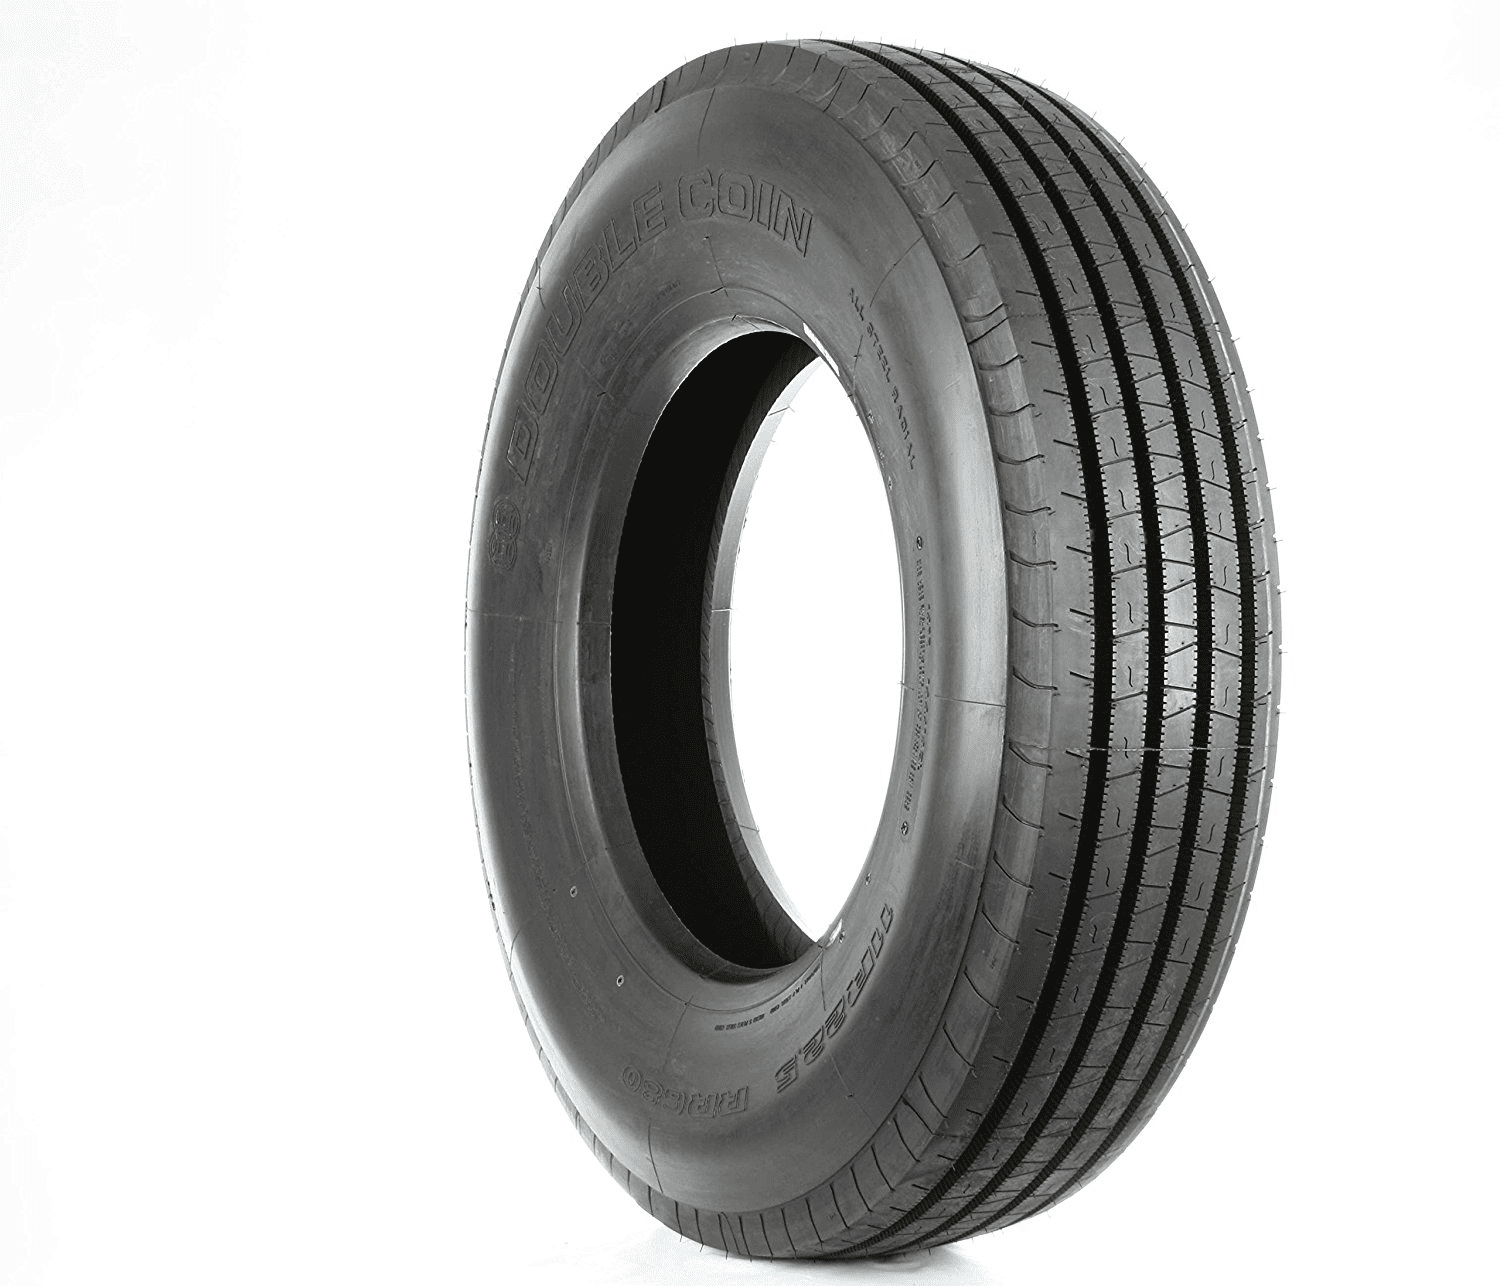 Roadlux R216 All Position Radial Commercial Truck Tire 265/70R19.5 LRH 